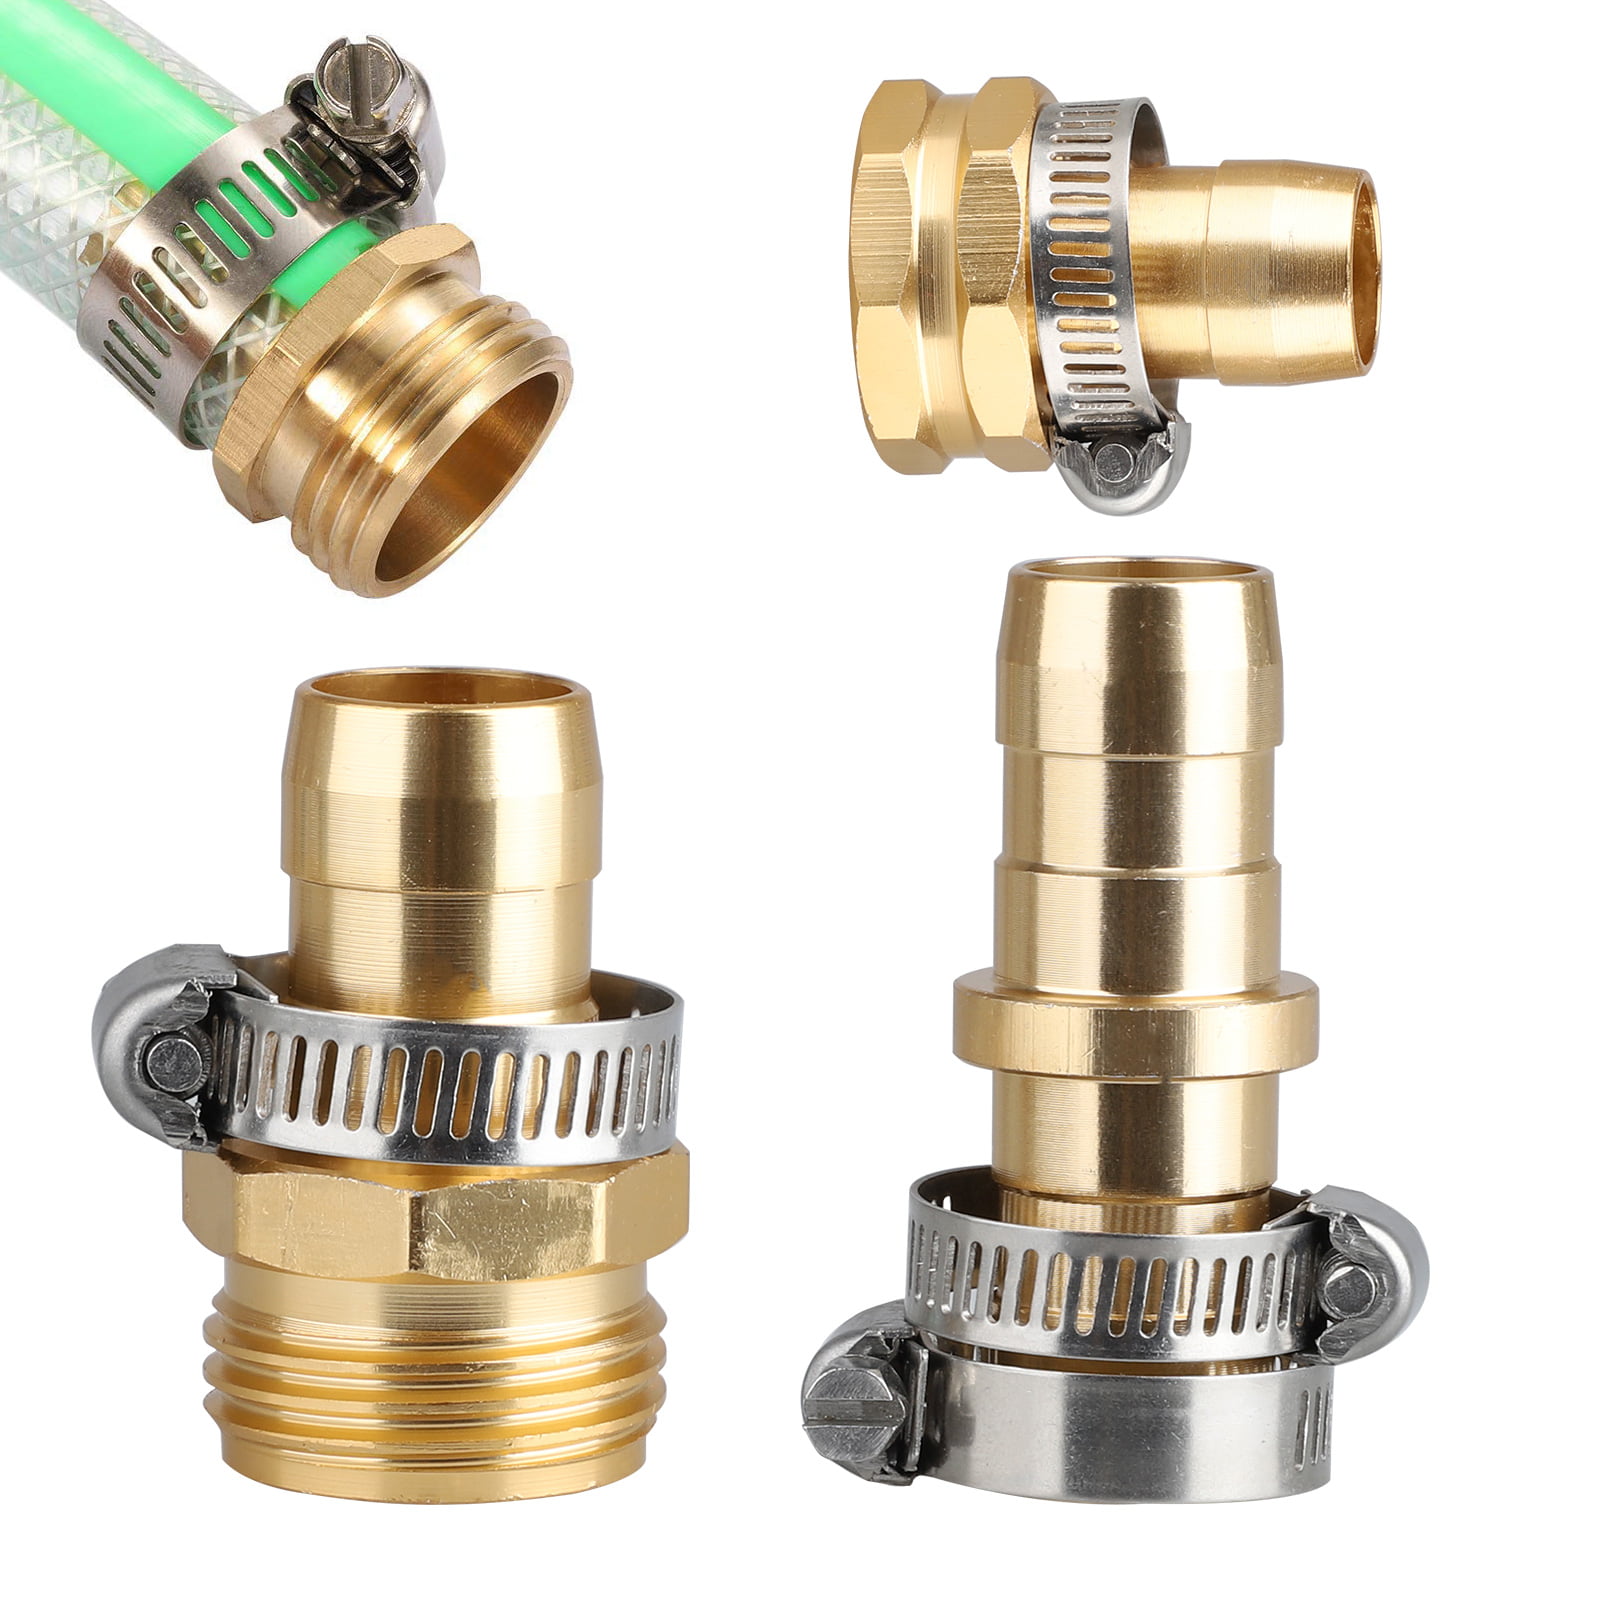 3pcs Garden Hose Adapter Fittings 5/8'' Brass Connector Replacement Parts 